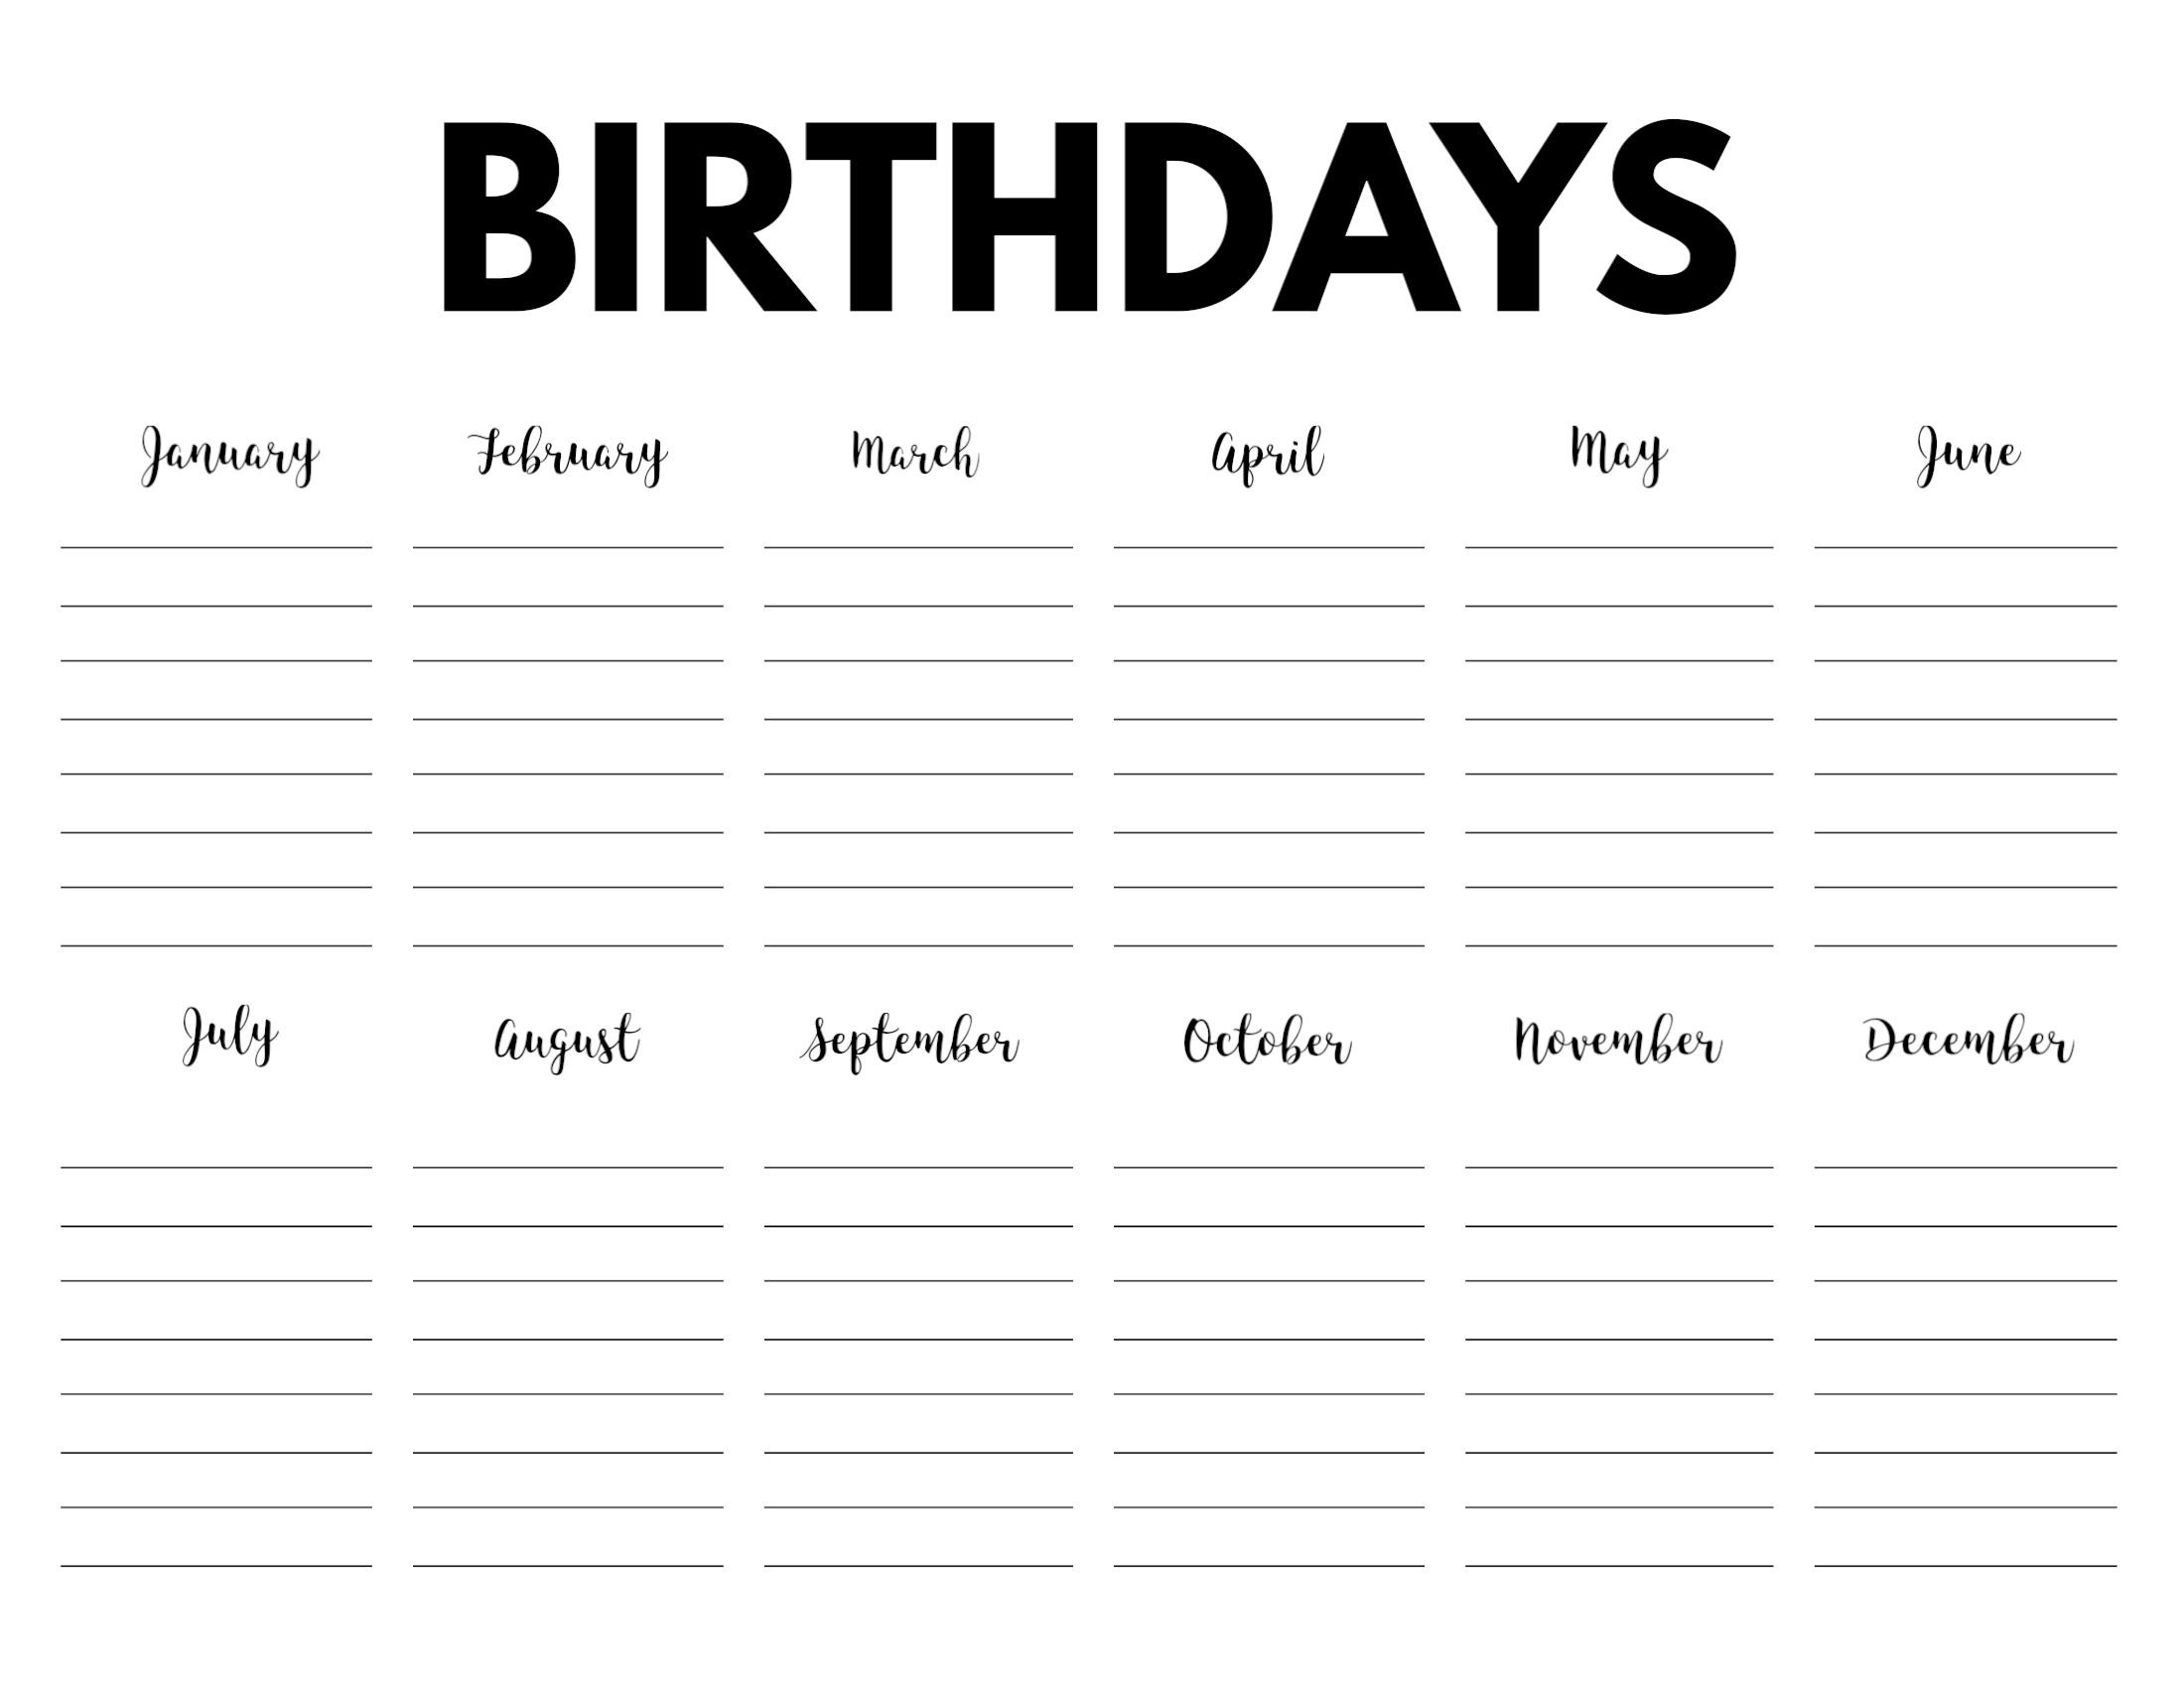 Birthday And Anniversary Calendar Template from www.papertraildesign.com